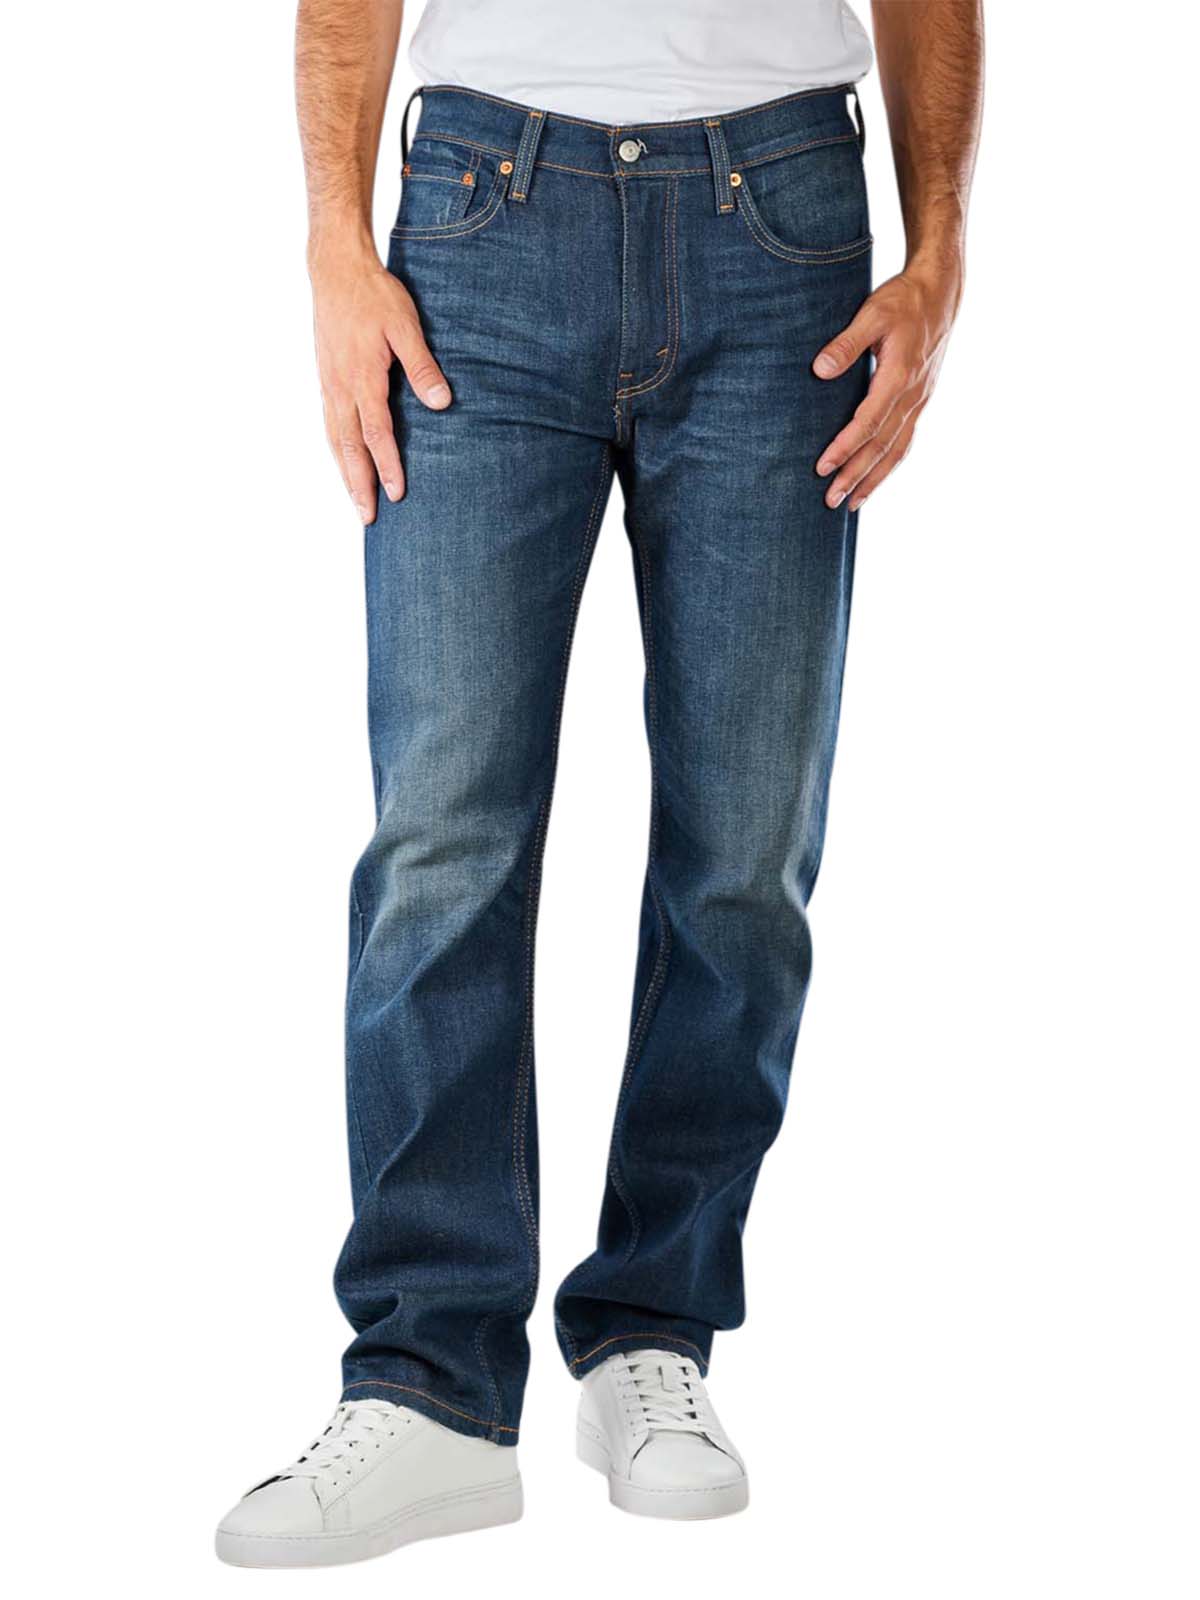 Levi's 514 Jeans Straight Fit burch adv Levi's Men's Jeans | Free Shipping  on  - SIMPLY LOOK GOOD